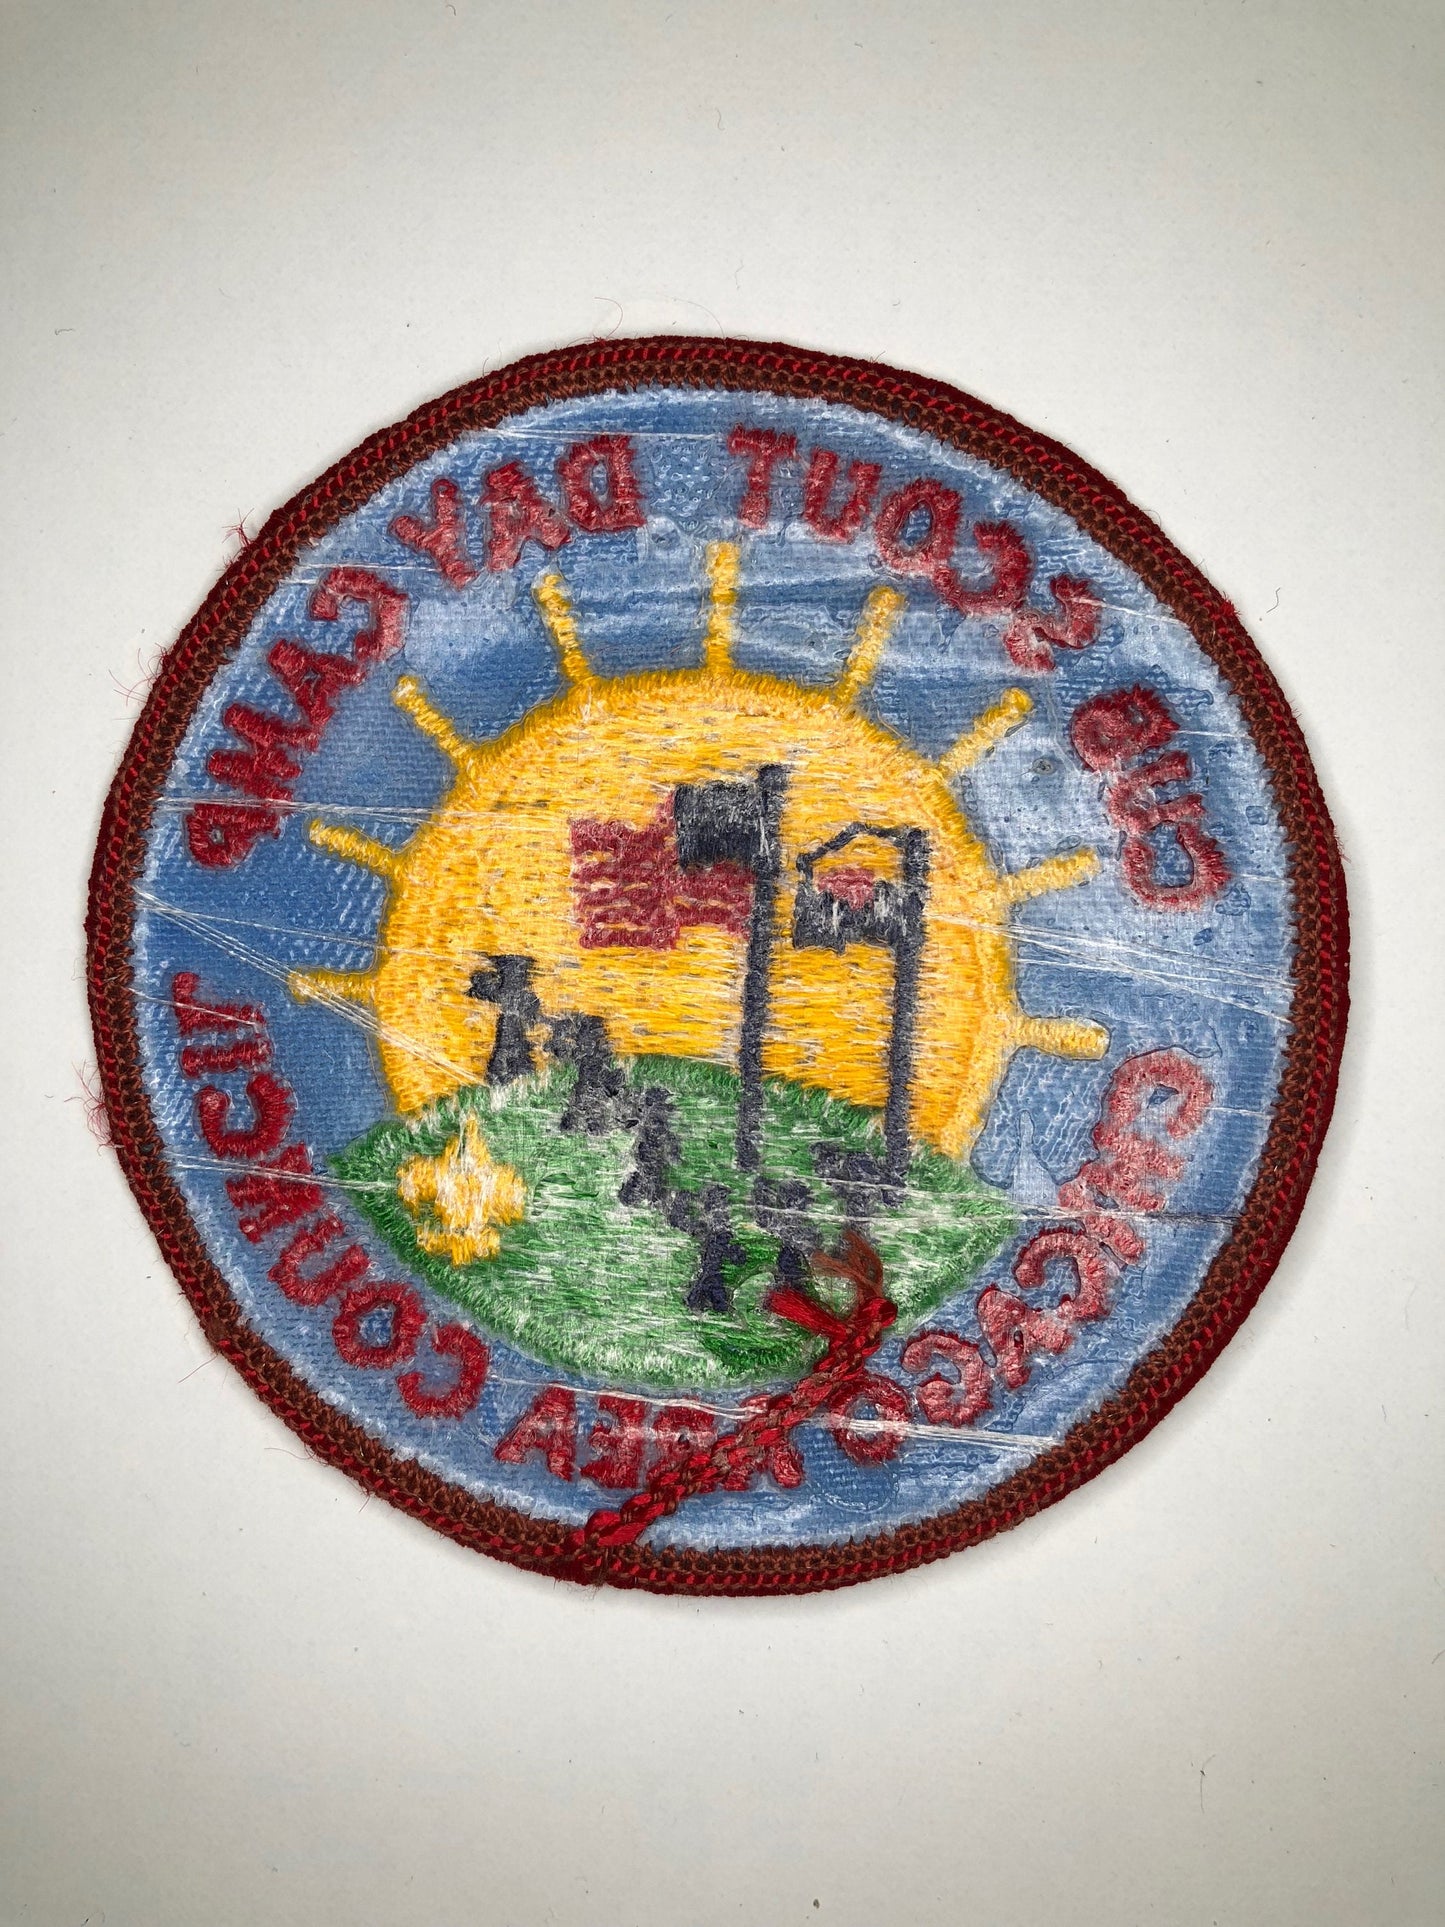 Cub Scout Day Camp Chicago Area Council Iron-on Vintage Patch